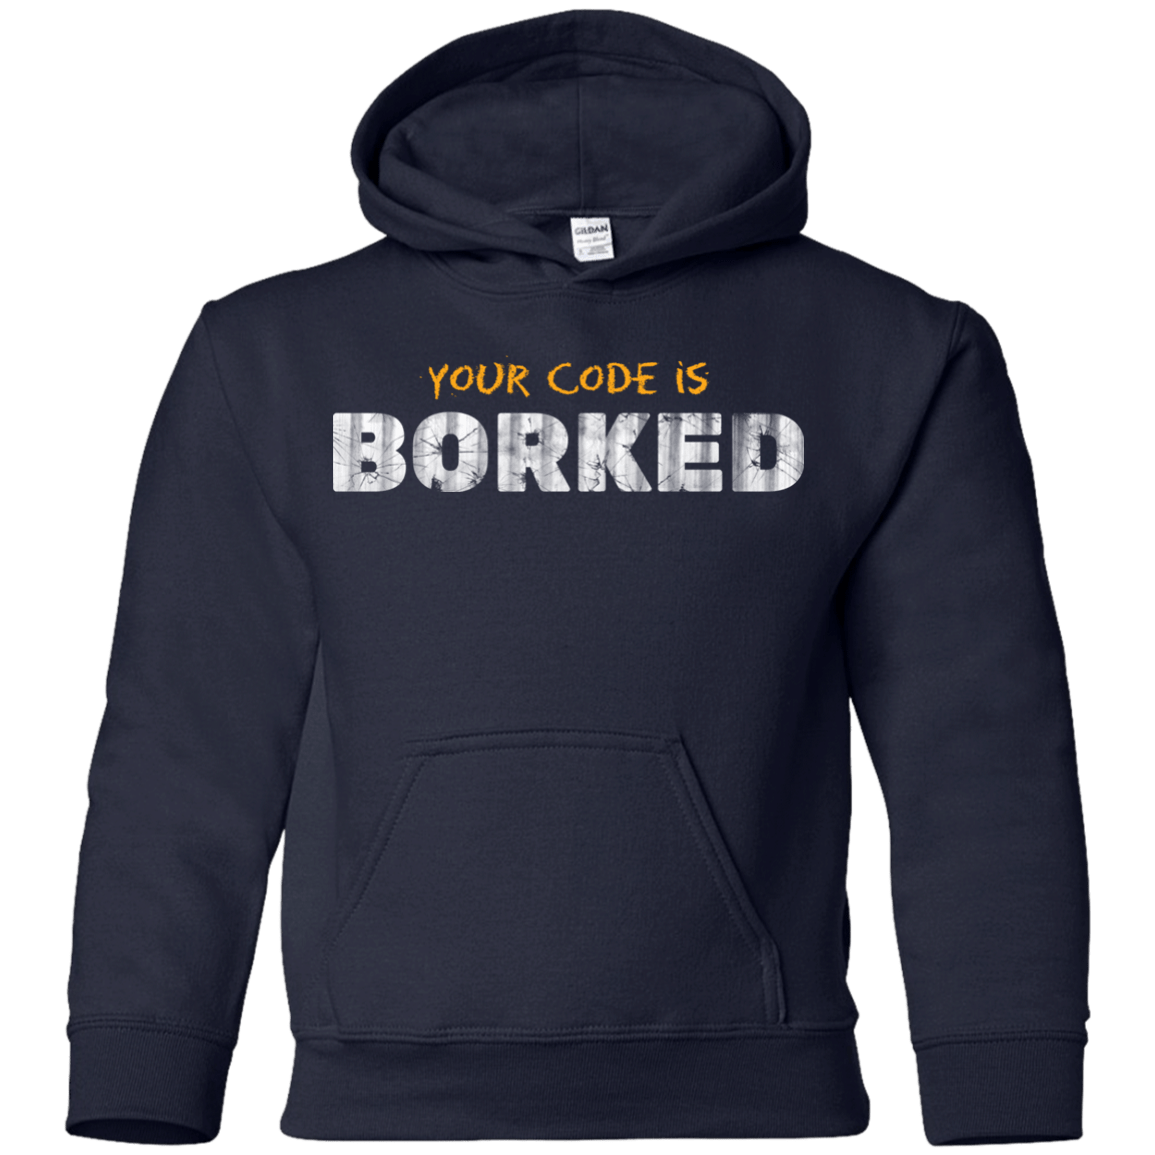 Sweatshirts Navy / YS Your Code Is Borked Youth Hoodie